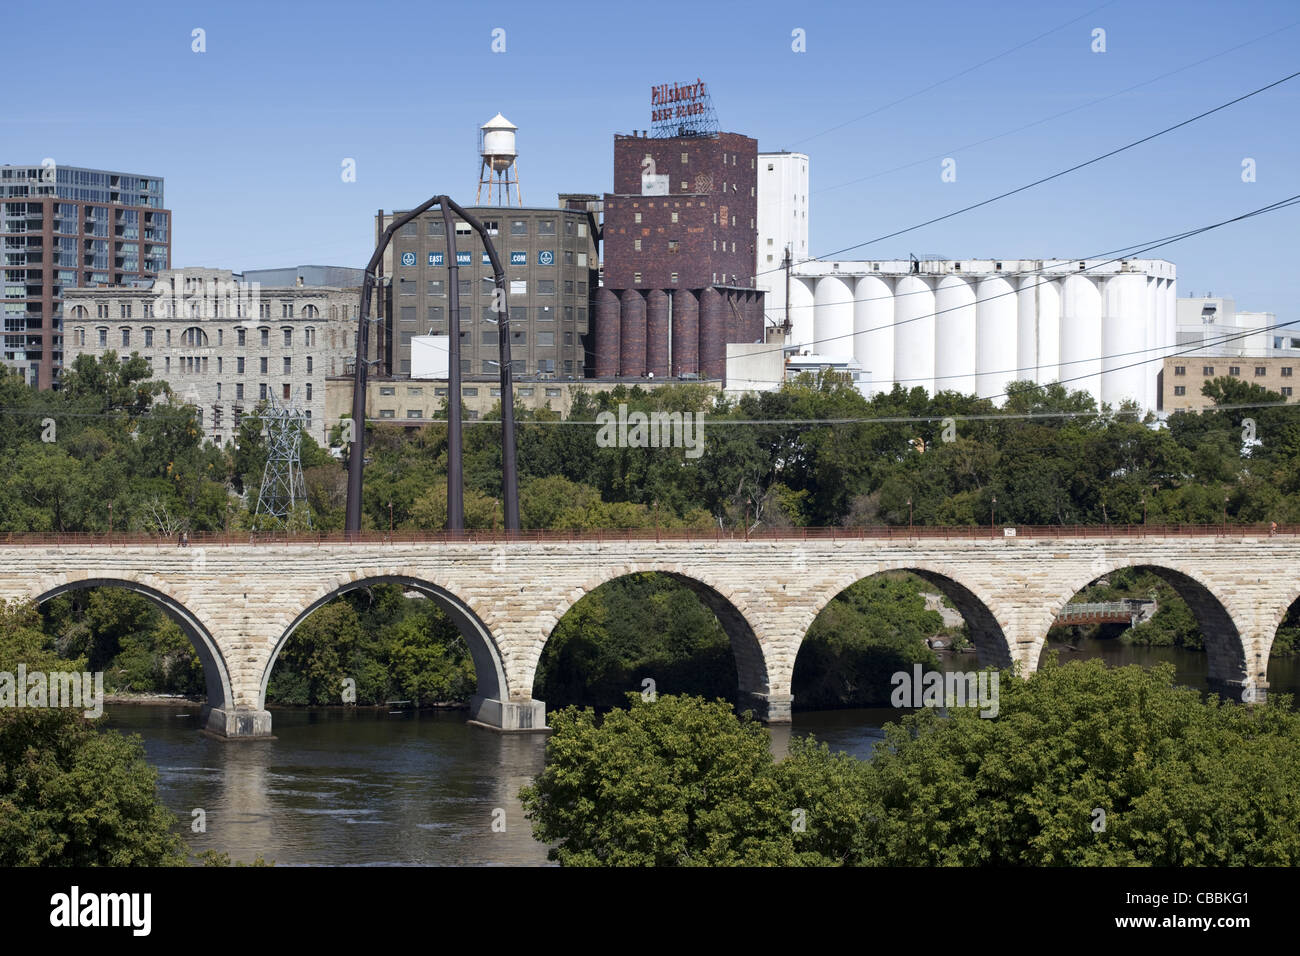 The Stone Arch Bridge and Pillsbury Milling complex along the Mississippi River in Minneapolis, Minnesota Stock Photo